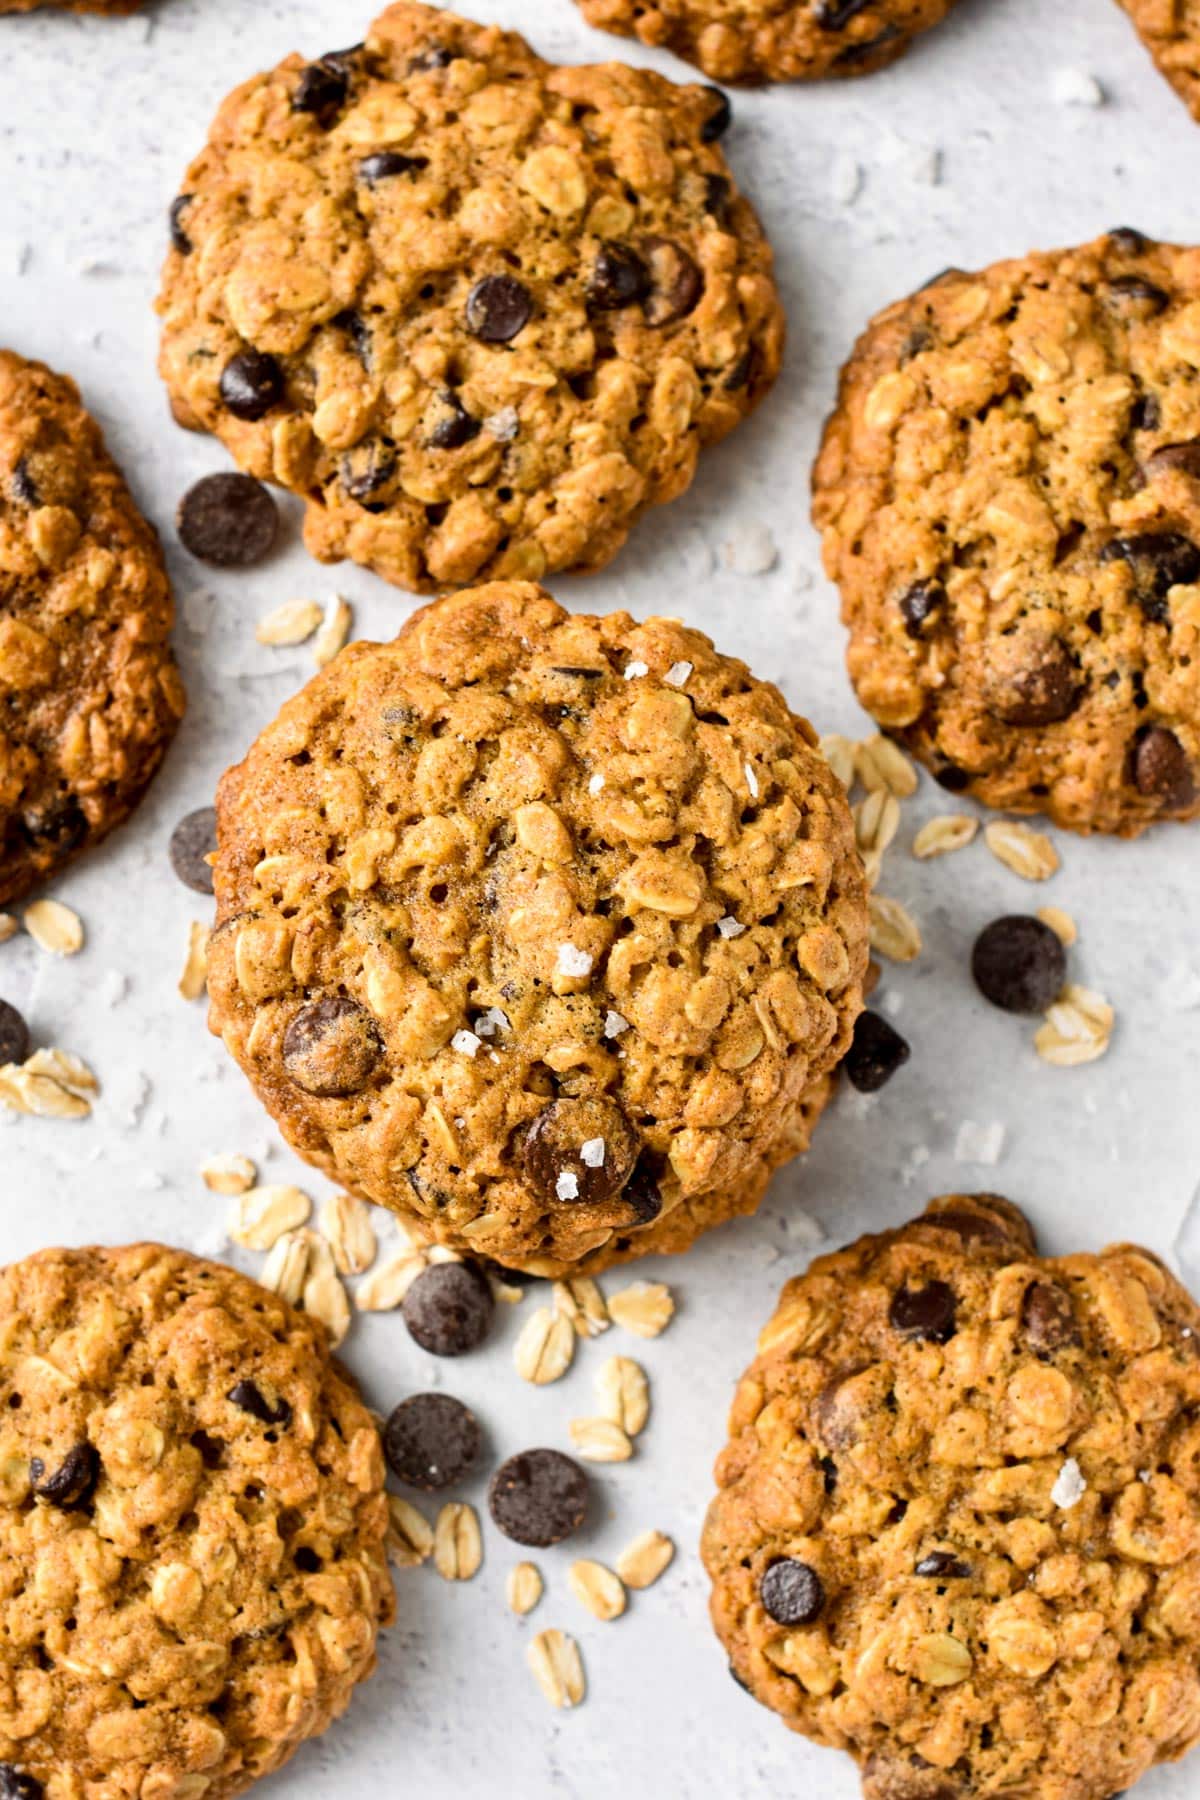 These Vegan Oatmeal Chocolate Chip Cookies are soft and chewy with crispy edges and packed with healthy proteins and fiber from oats. They are definitely the easiest healthy breakfast cookies on the go.